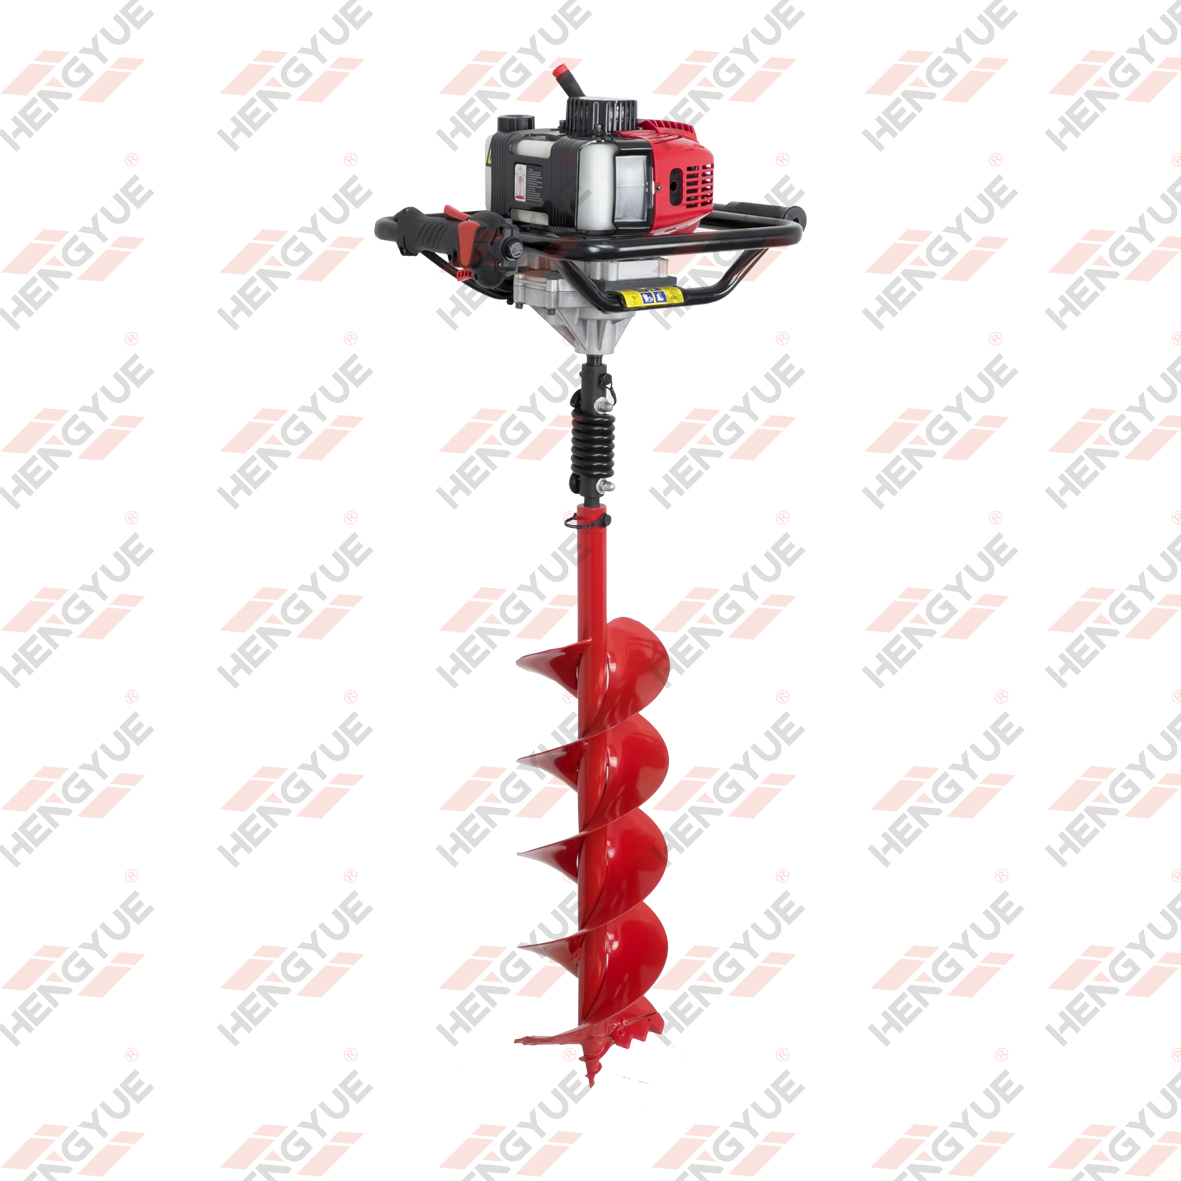 Powered by HONDA GX35 Engine Power Popular Hand Held Type Earth Auger 